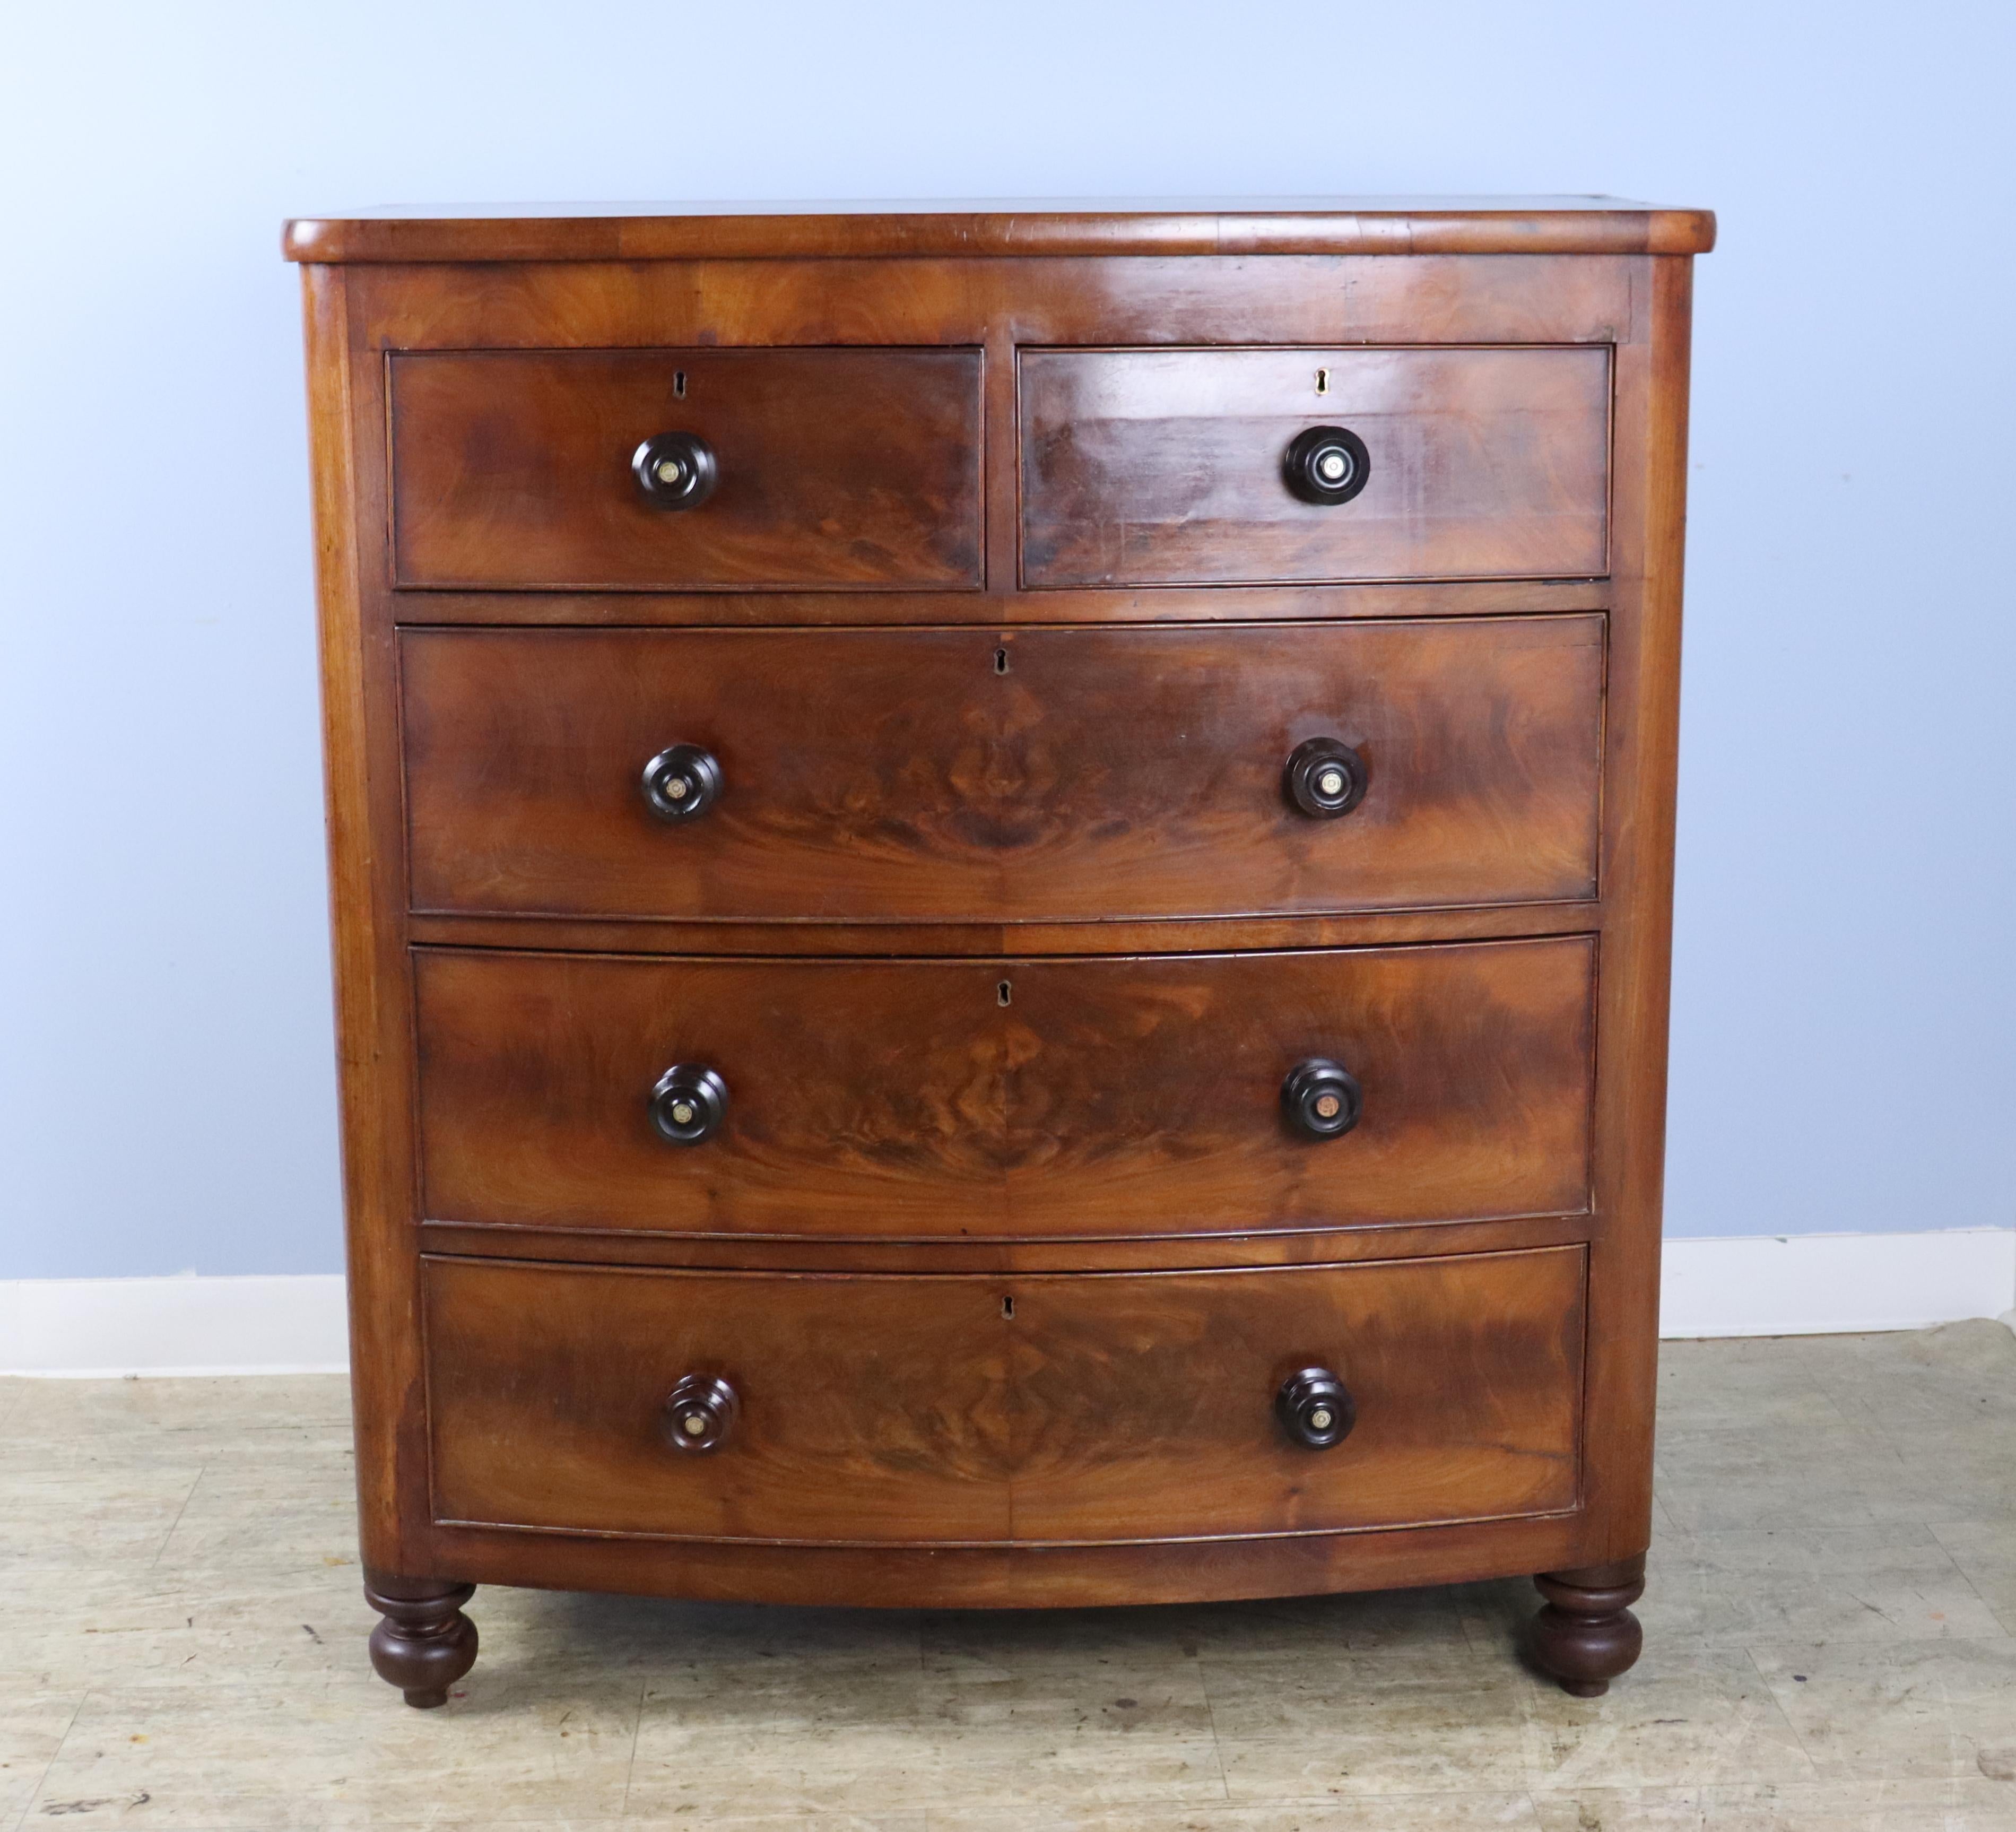 A handsome bowfront chest of drawers with bookmatched flame mahogany veneer.  Other features of note are the eye catching knobs, which may be replaced, the sweet bun feet, and the original blue paper drawer lining.  There is some buckling of the